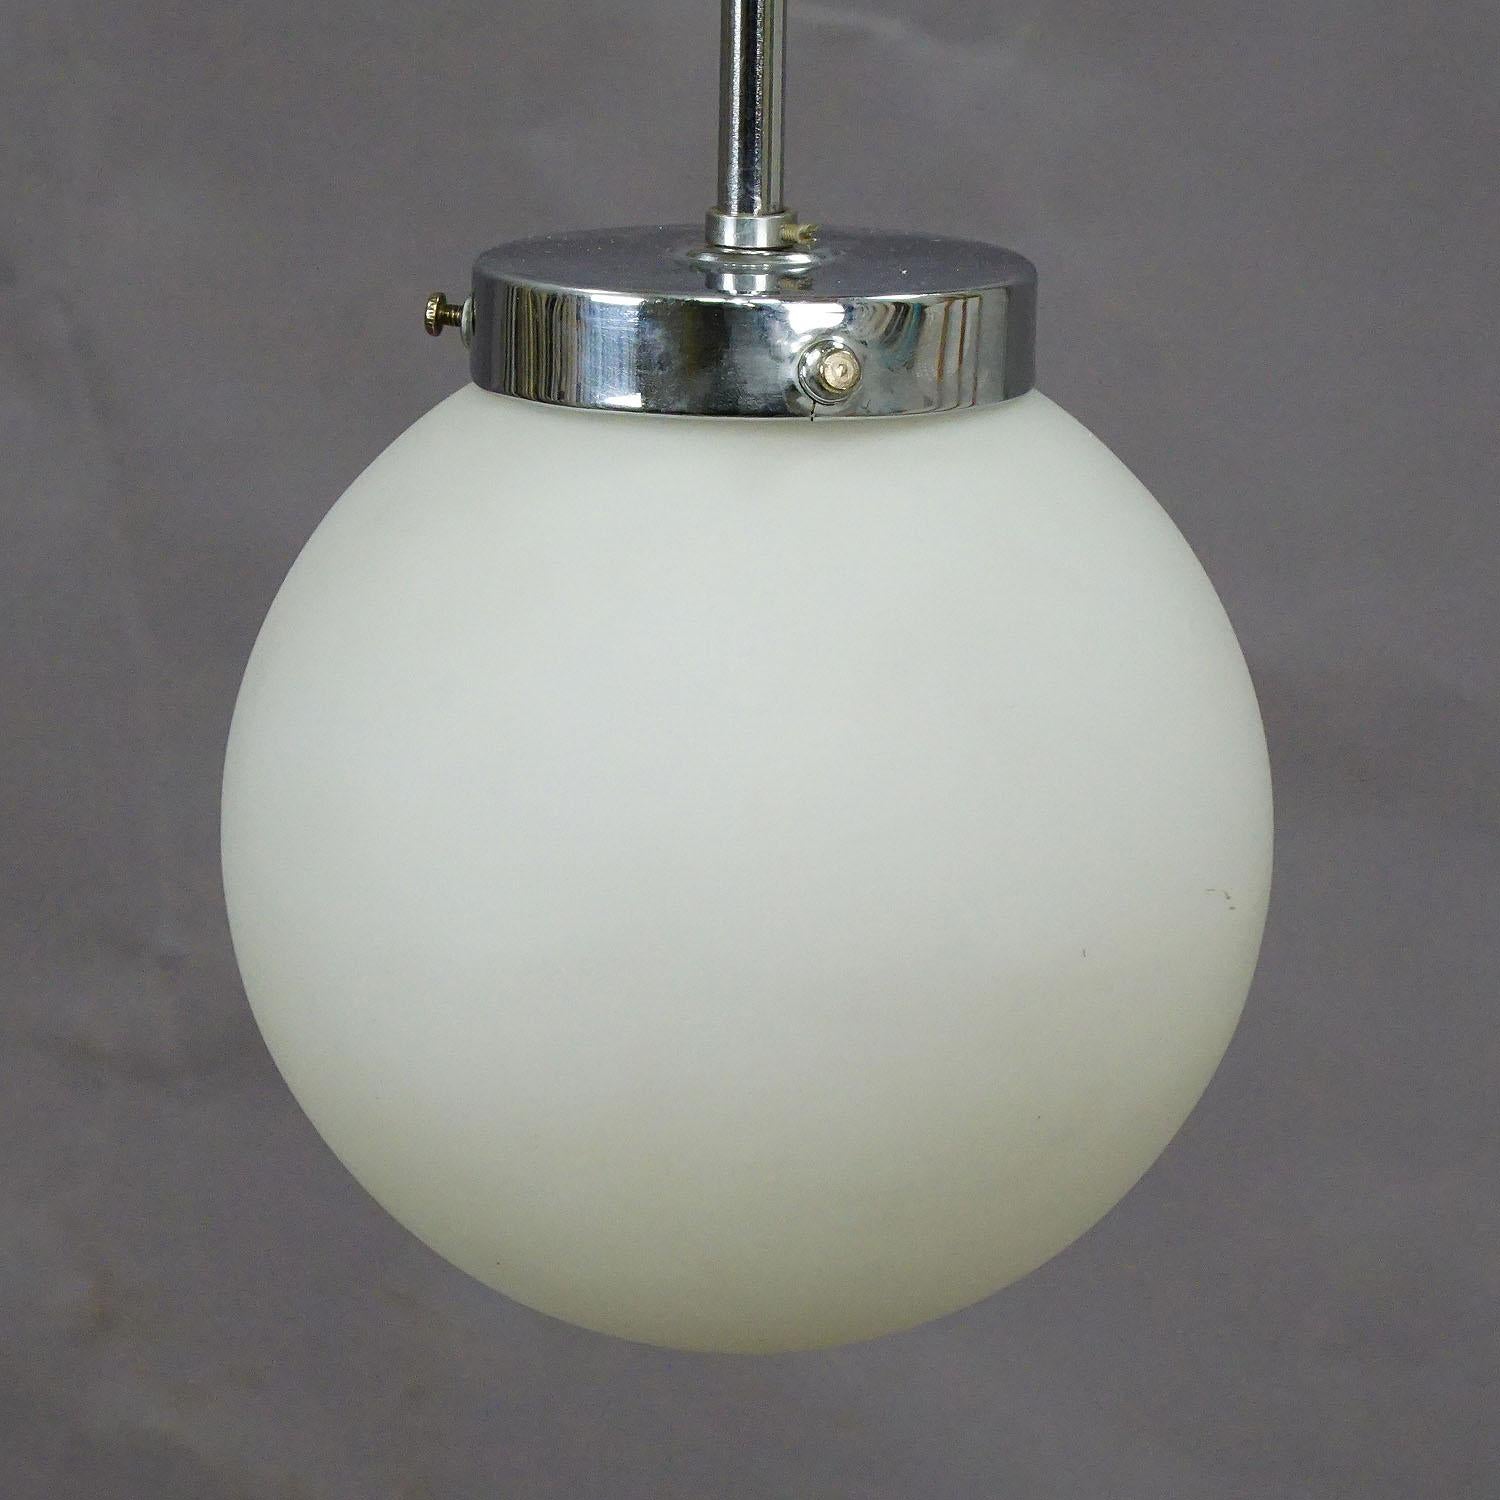 An antique Bauhaus style pendant lamp with a white opaline glass shade and chromium plated metal fitting. Cabling renewed, working order. With international E27 base lamp holder.

Measures: Height 22.05